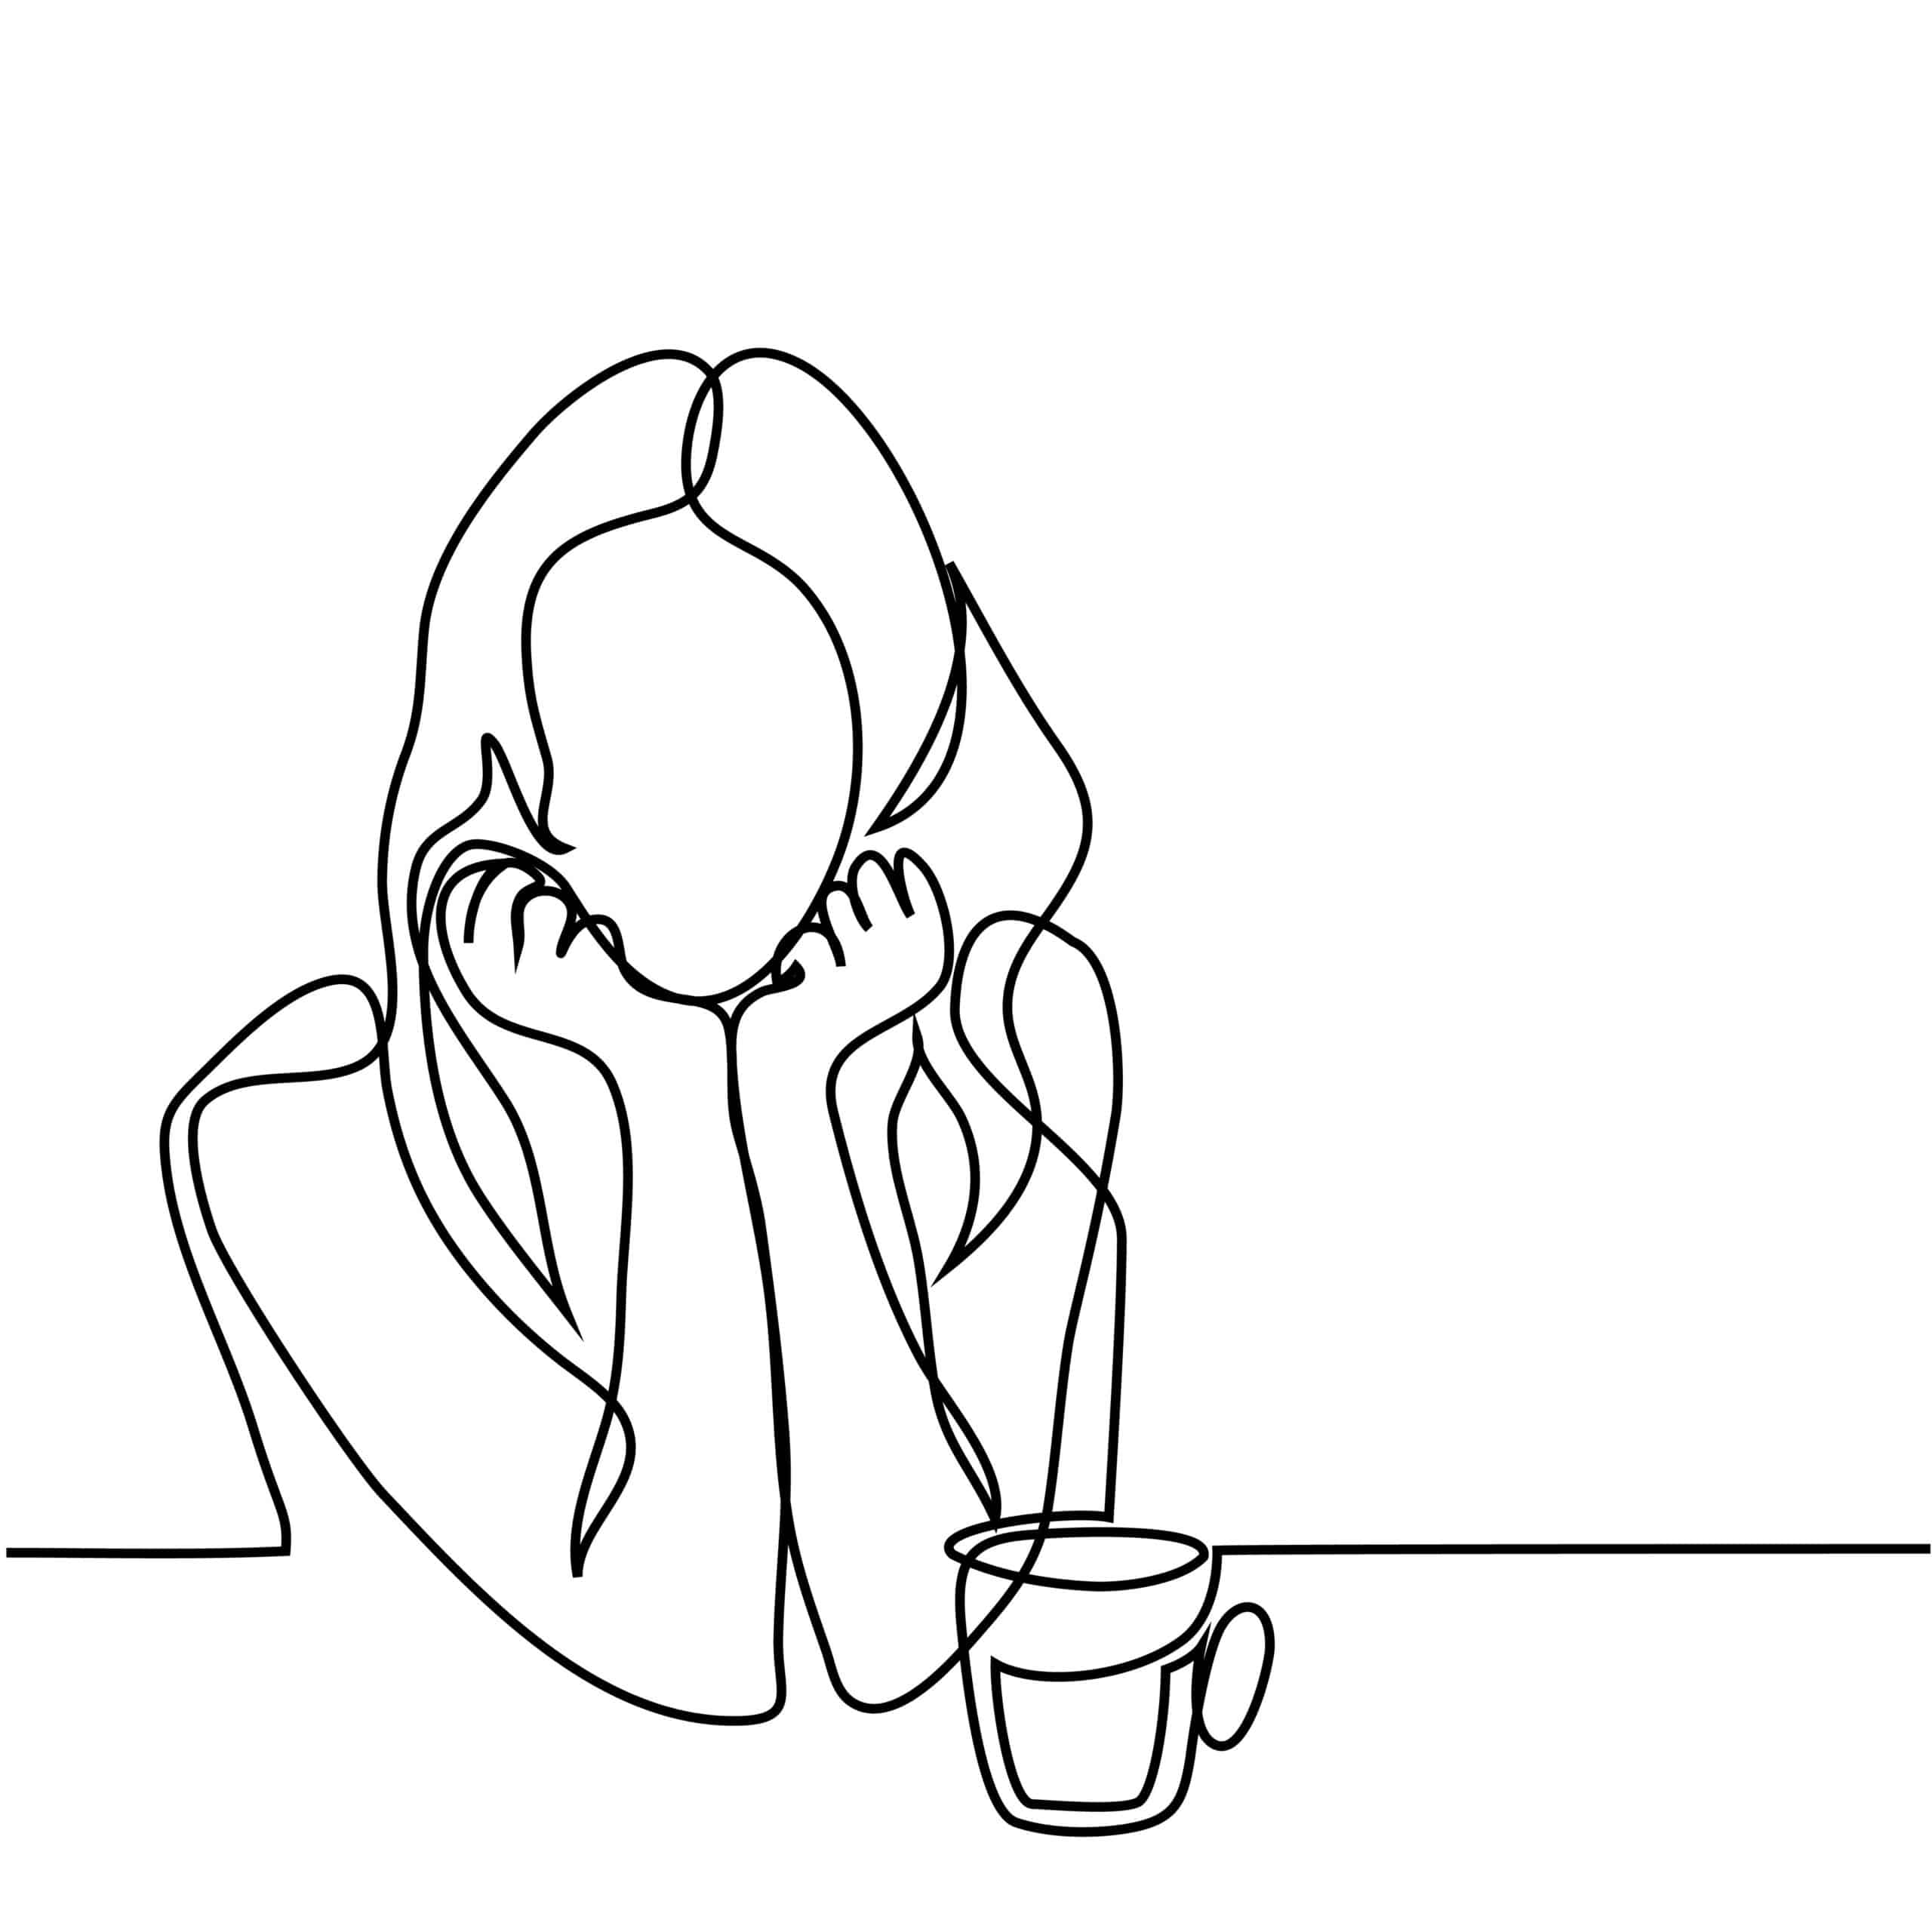 Line drawing of woman sitting with a coffee cup.